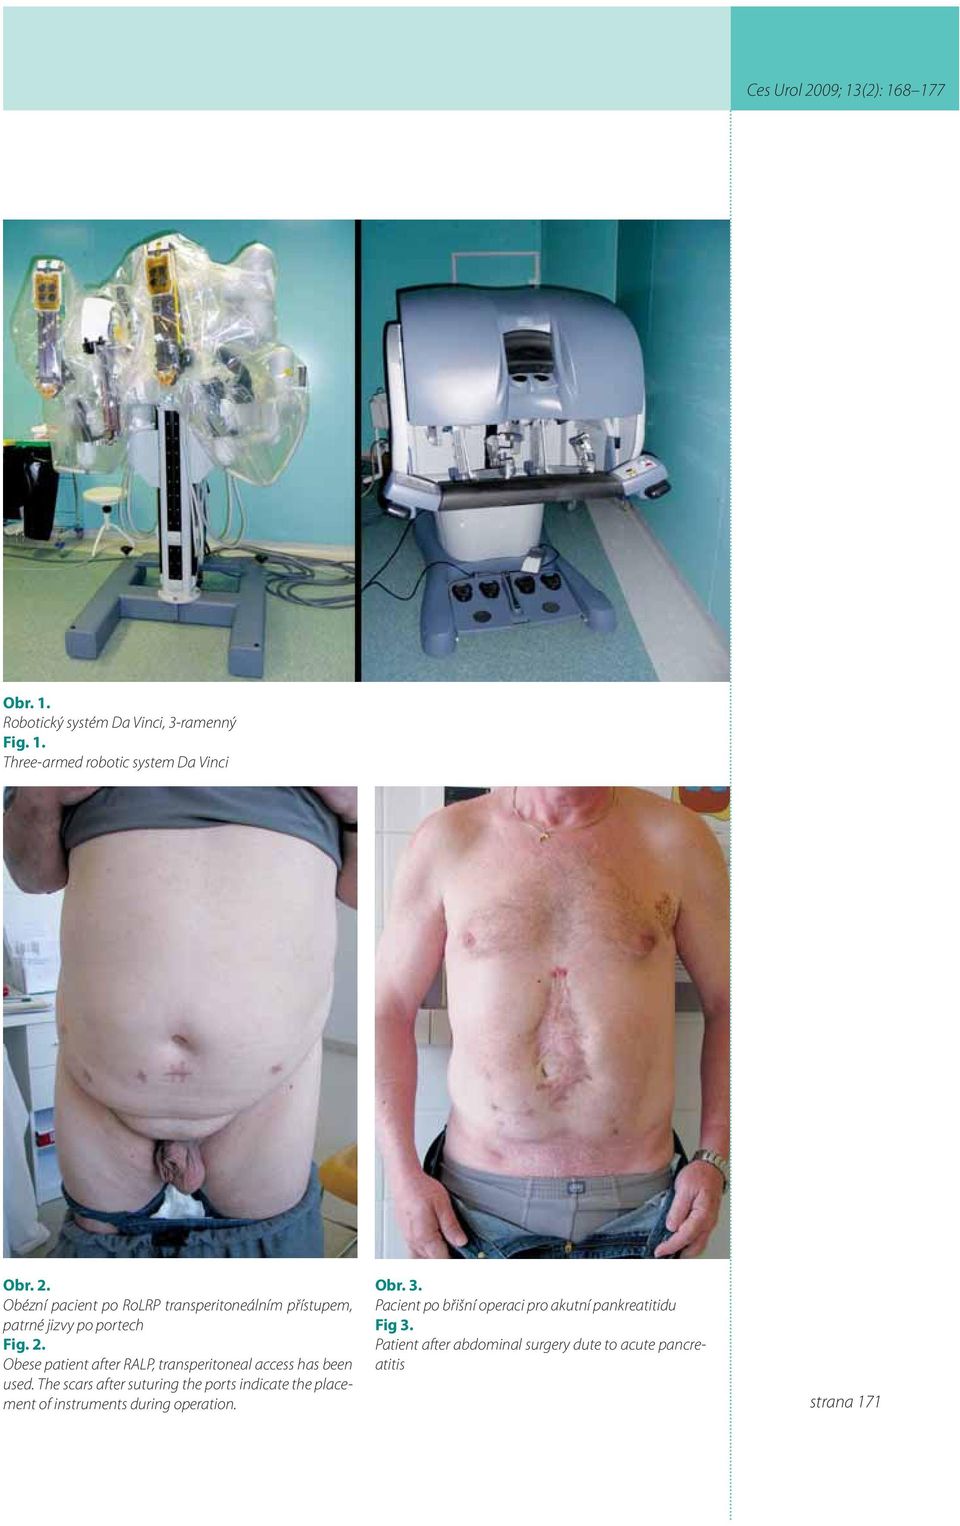 Obese patient after RALP, transperitoneal access has been used.